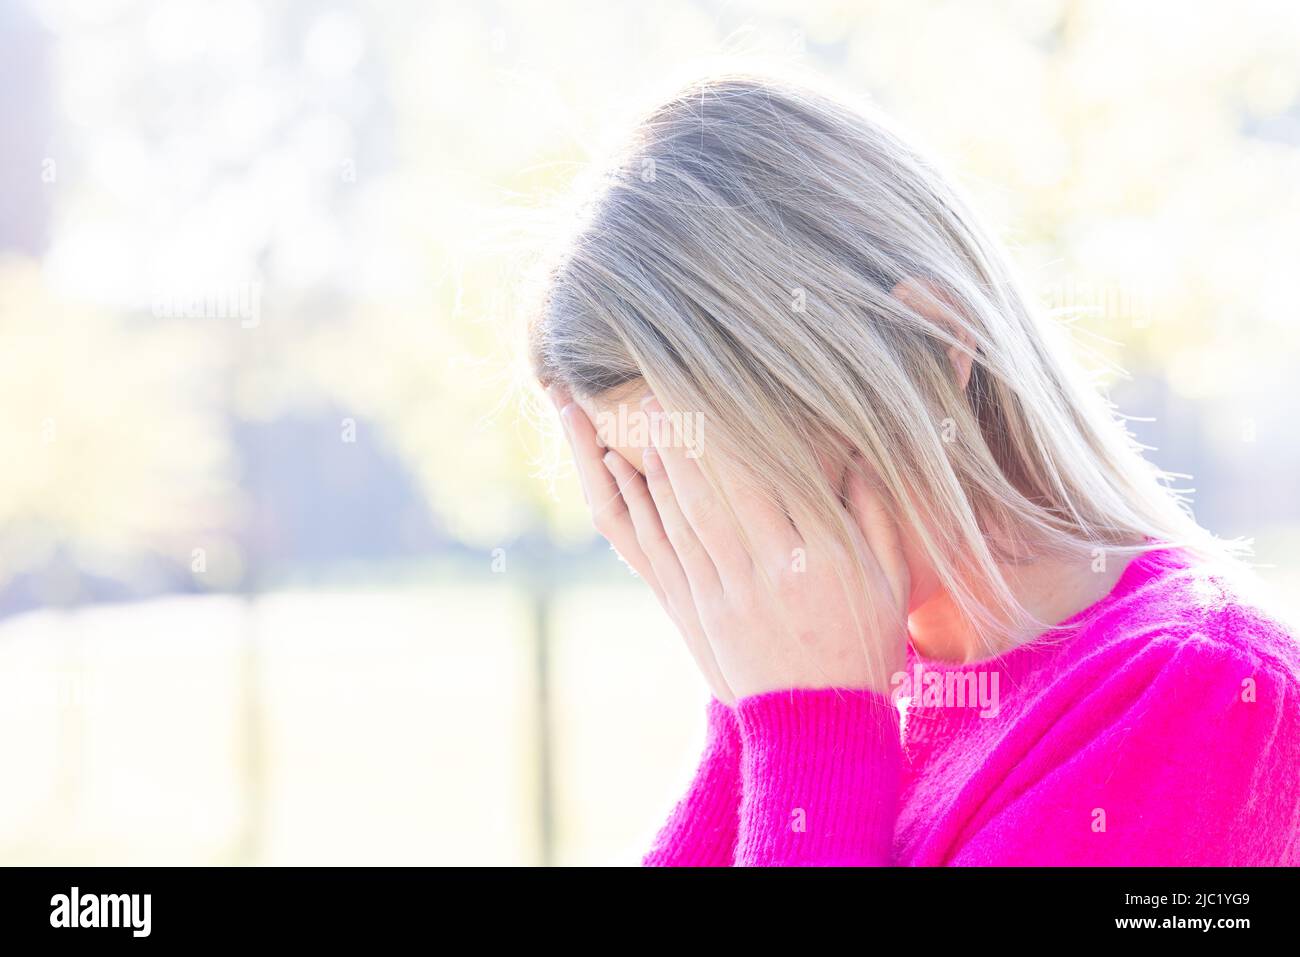 Tired, sad or depressed young beautiful blonde woman burries her face in her hands being frightened, having anxiety attack or headache migraine or depression, upset frustrated girl troubled with problem feel stressed cover crying face with hand suffer from grief sorrow concept. High quality photo Stock Photo